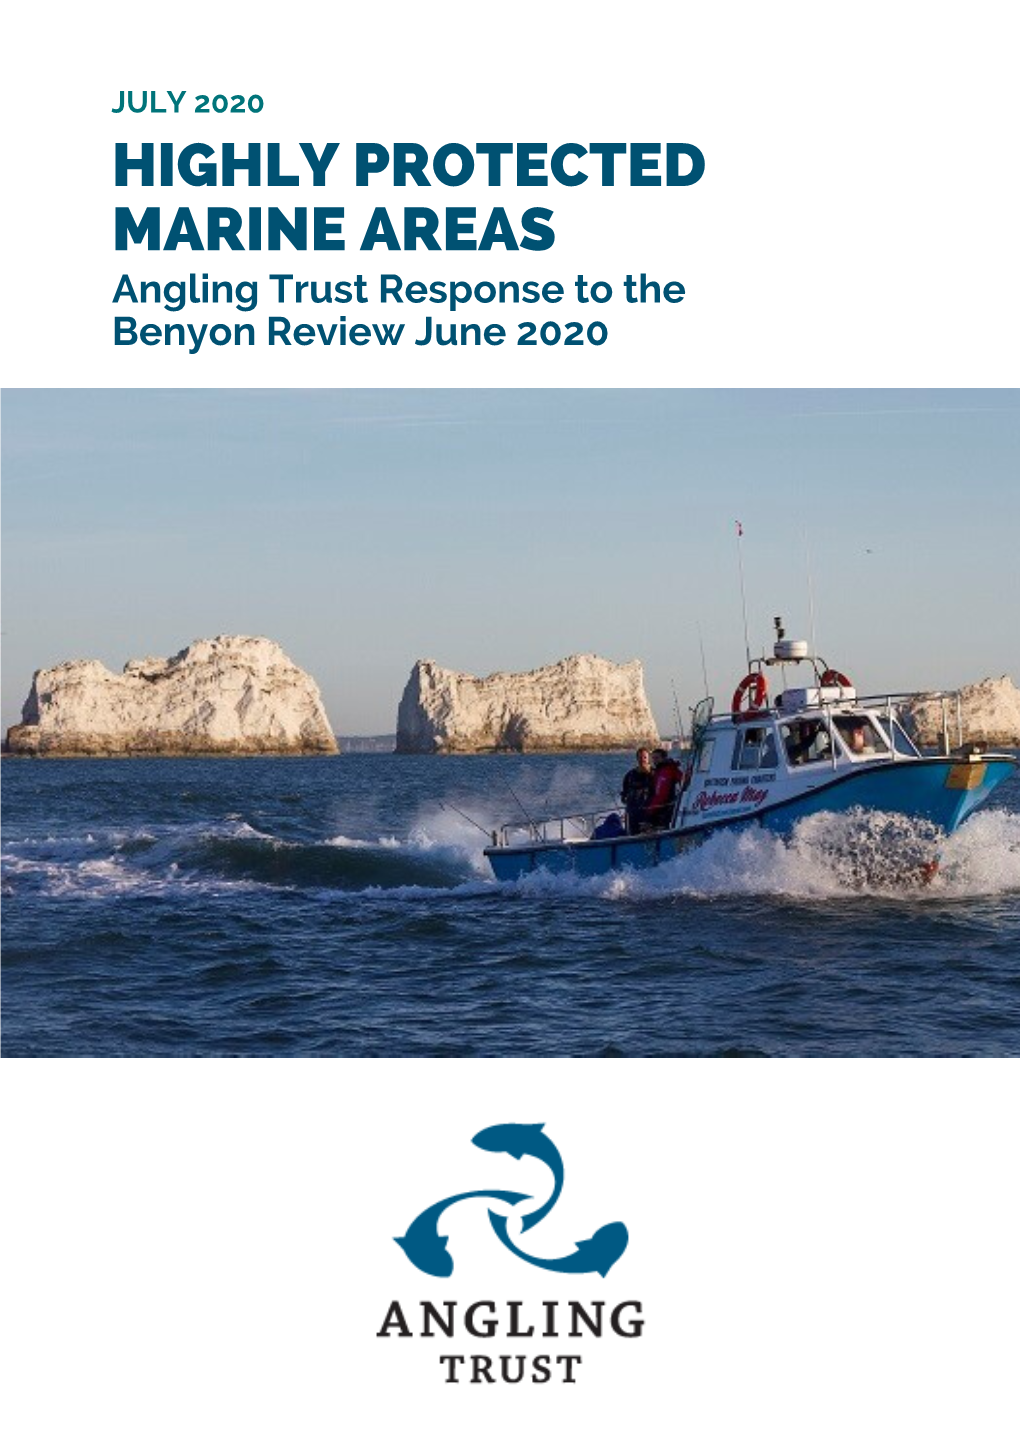 HIGHLY PROTECTED MARINE AREAS Angling Trust Response to the Benyon Review June 2020